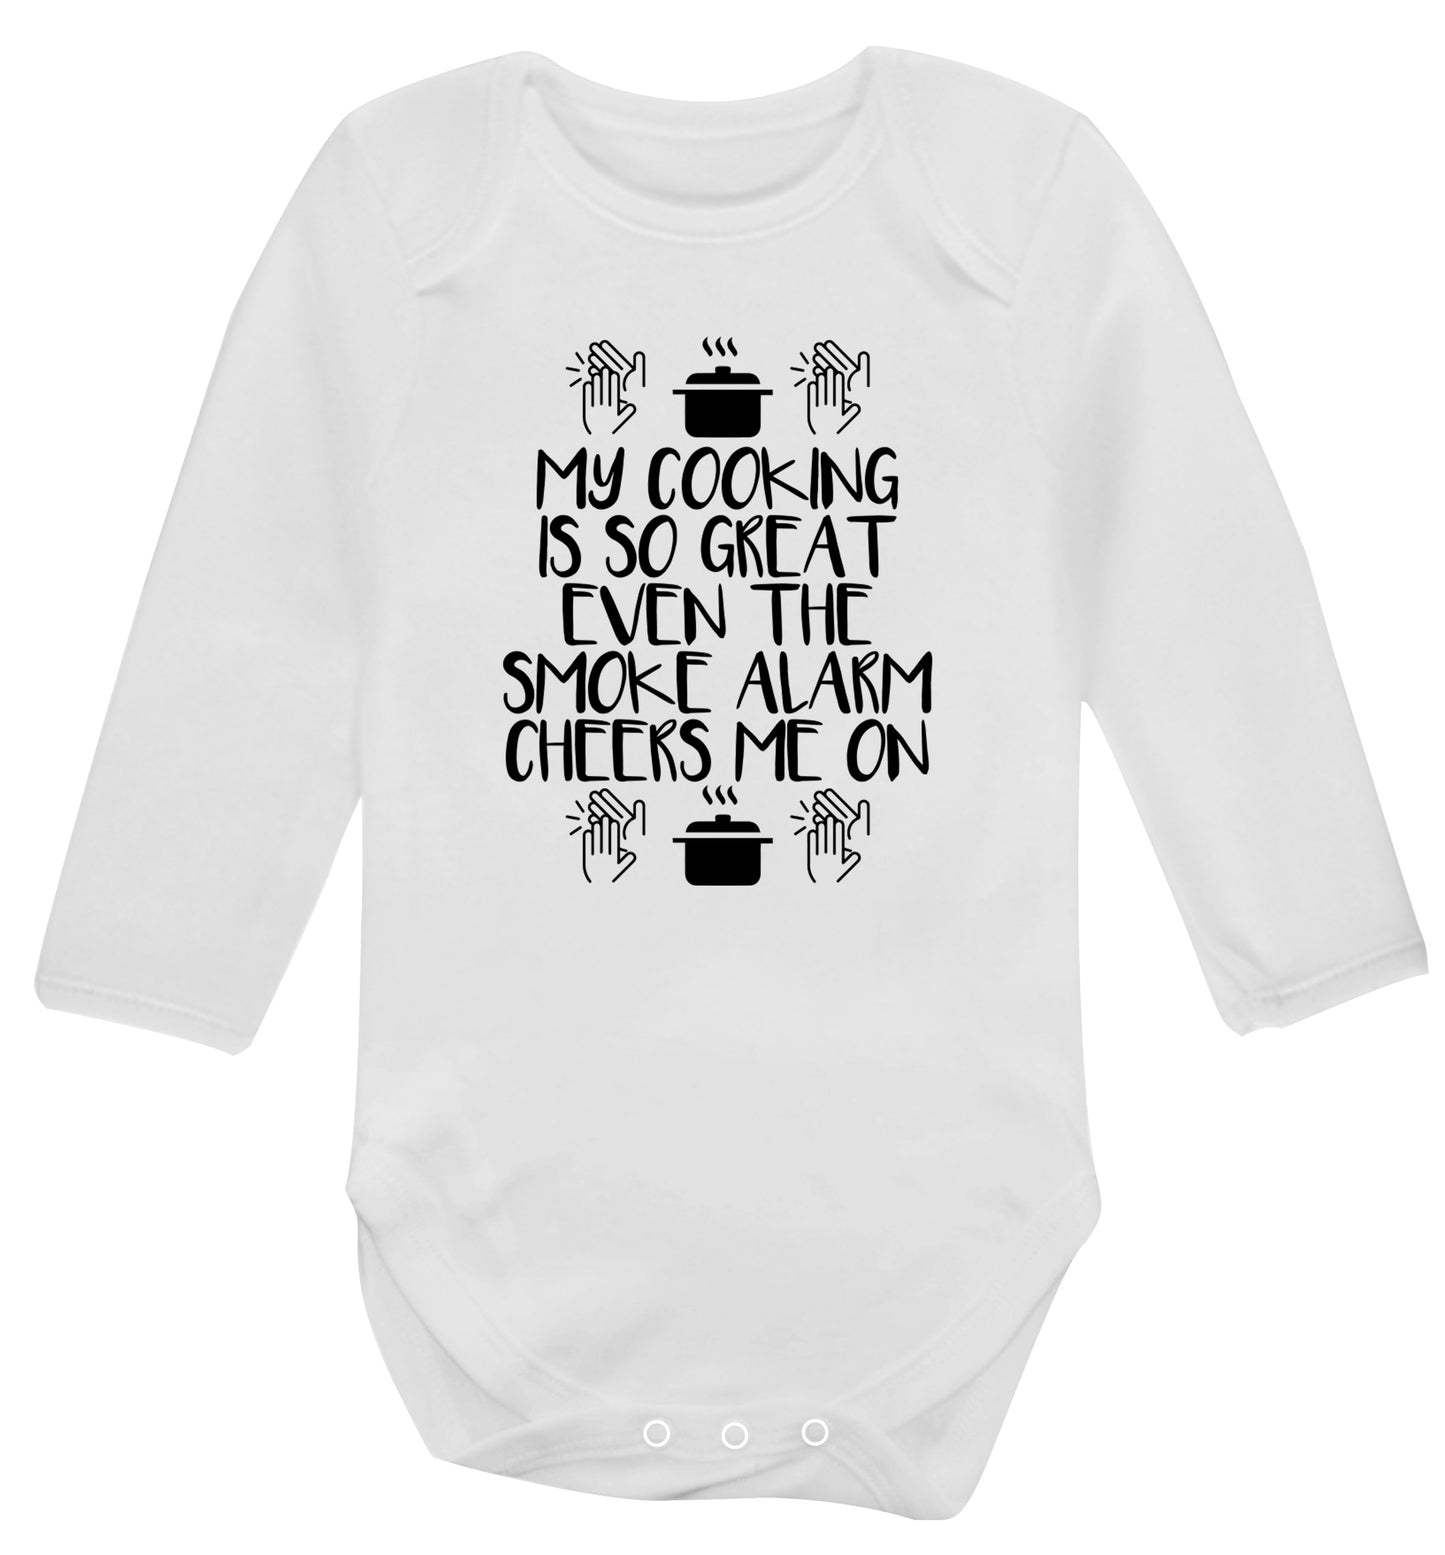 My cooking is so great even the smoke alarm cheers me on! Baby Vest long sleeved white 6-12 months